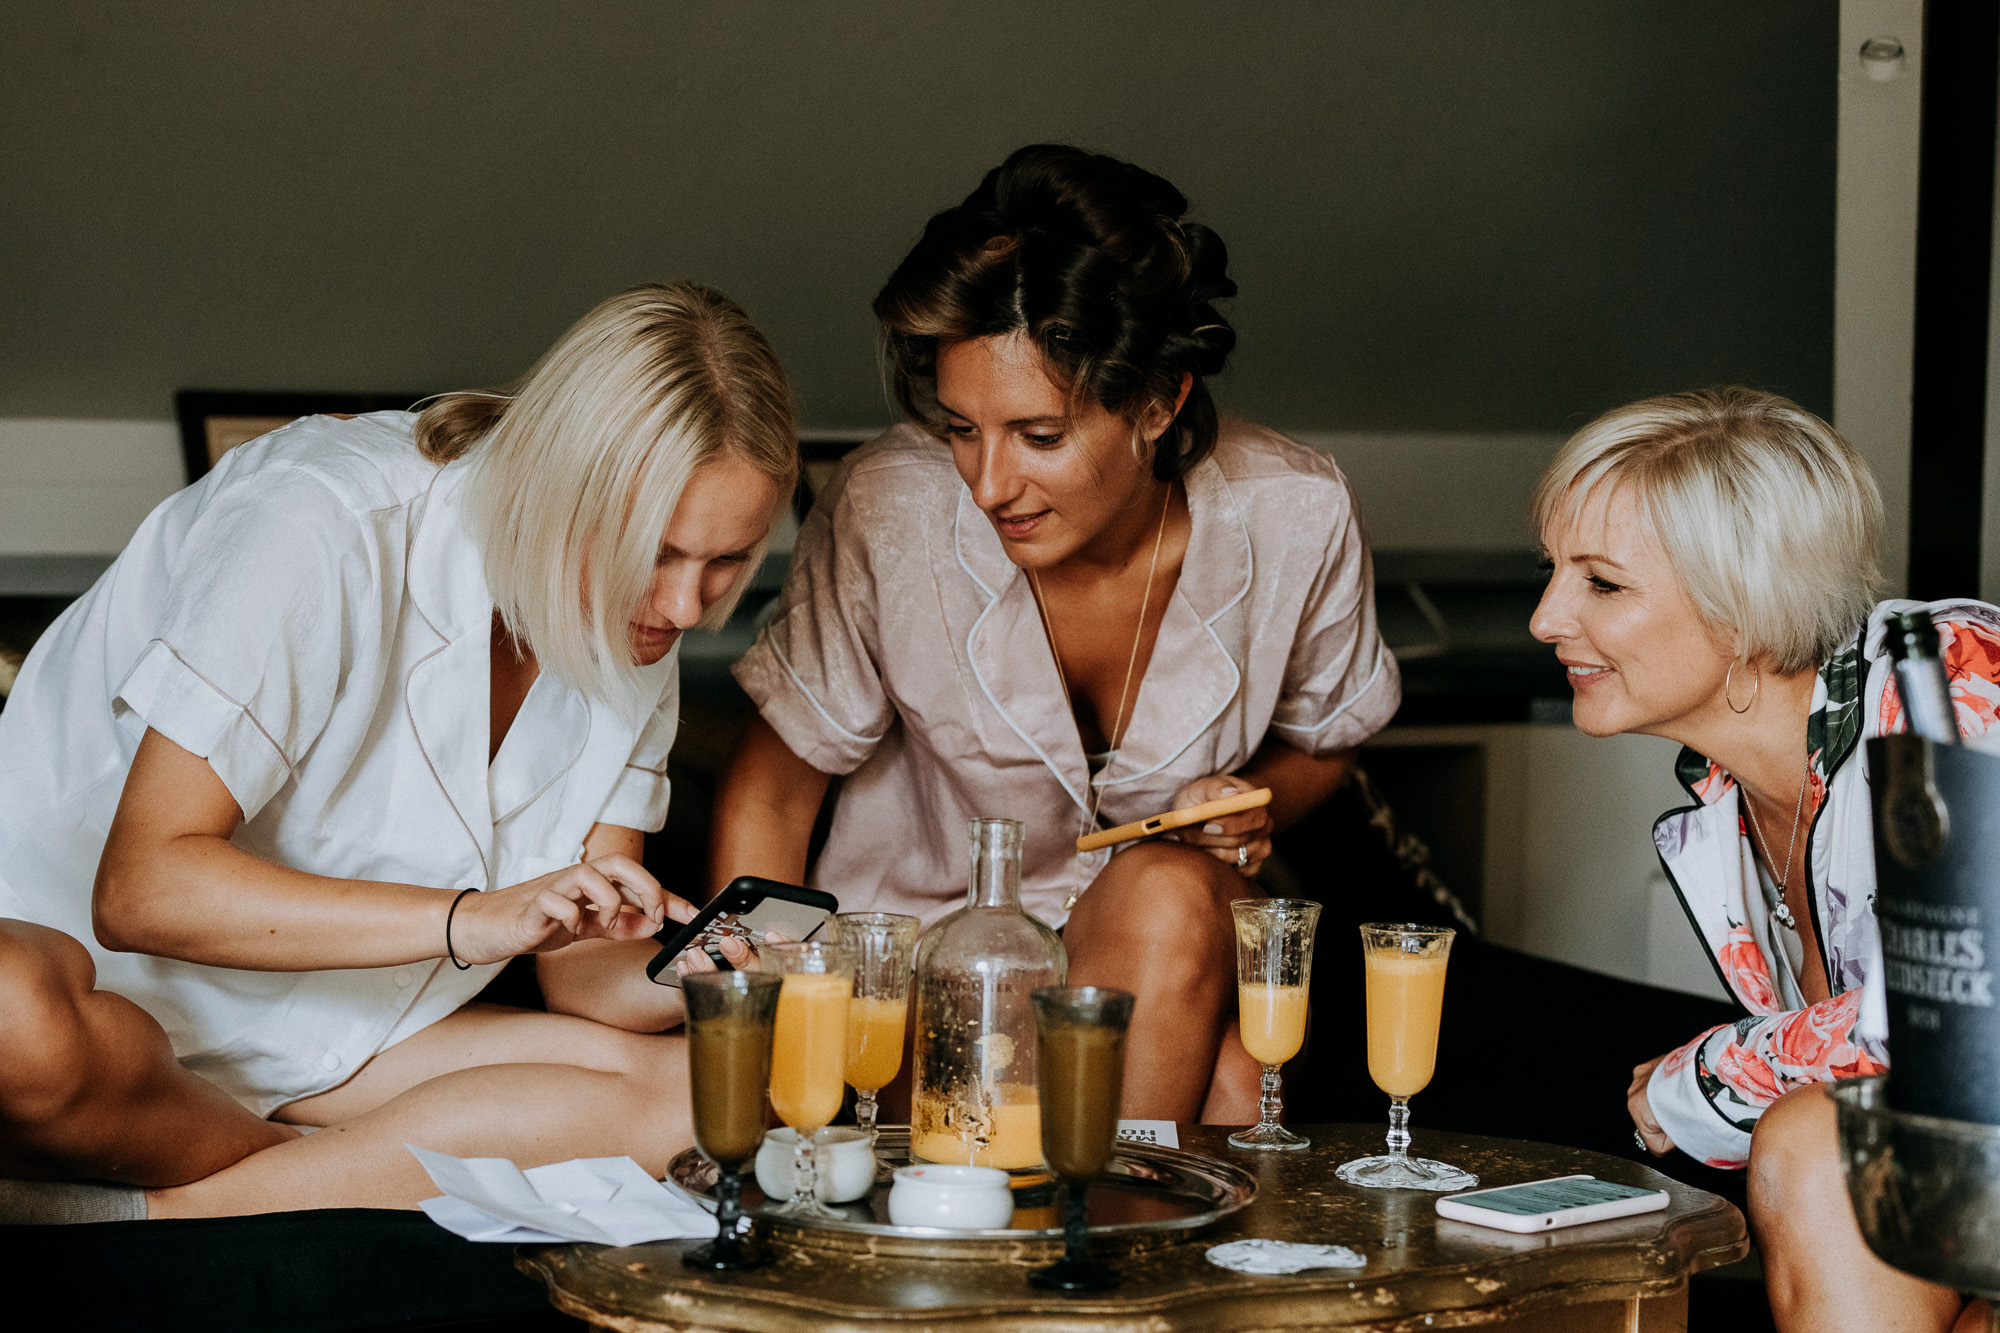 Mimosas are served, the bride enjoys a relaxing moment with her maid of honor and her mum